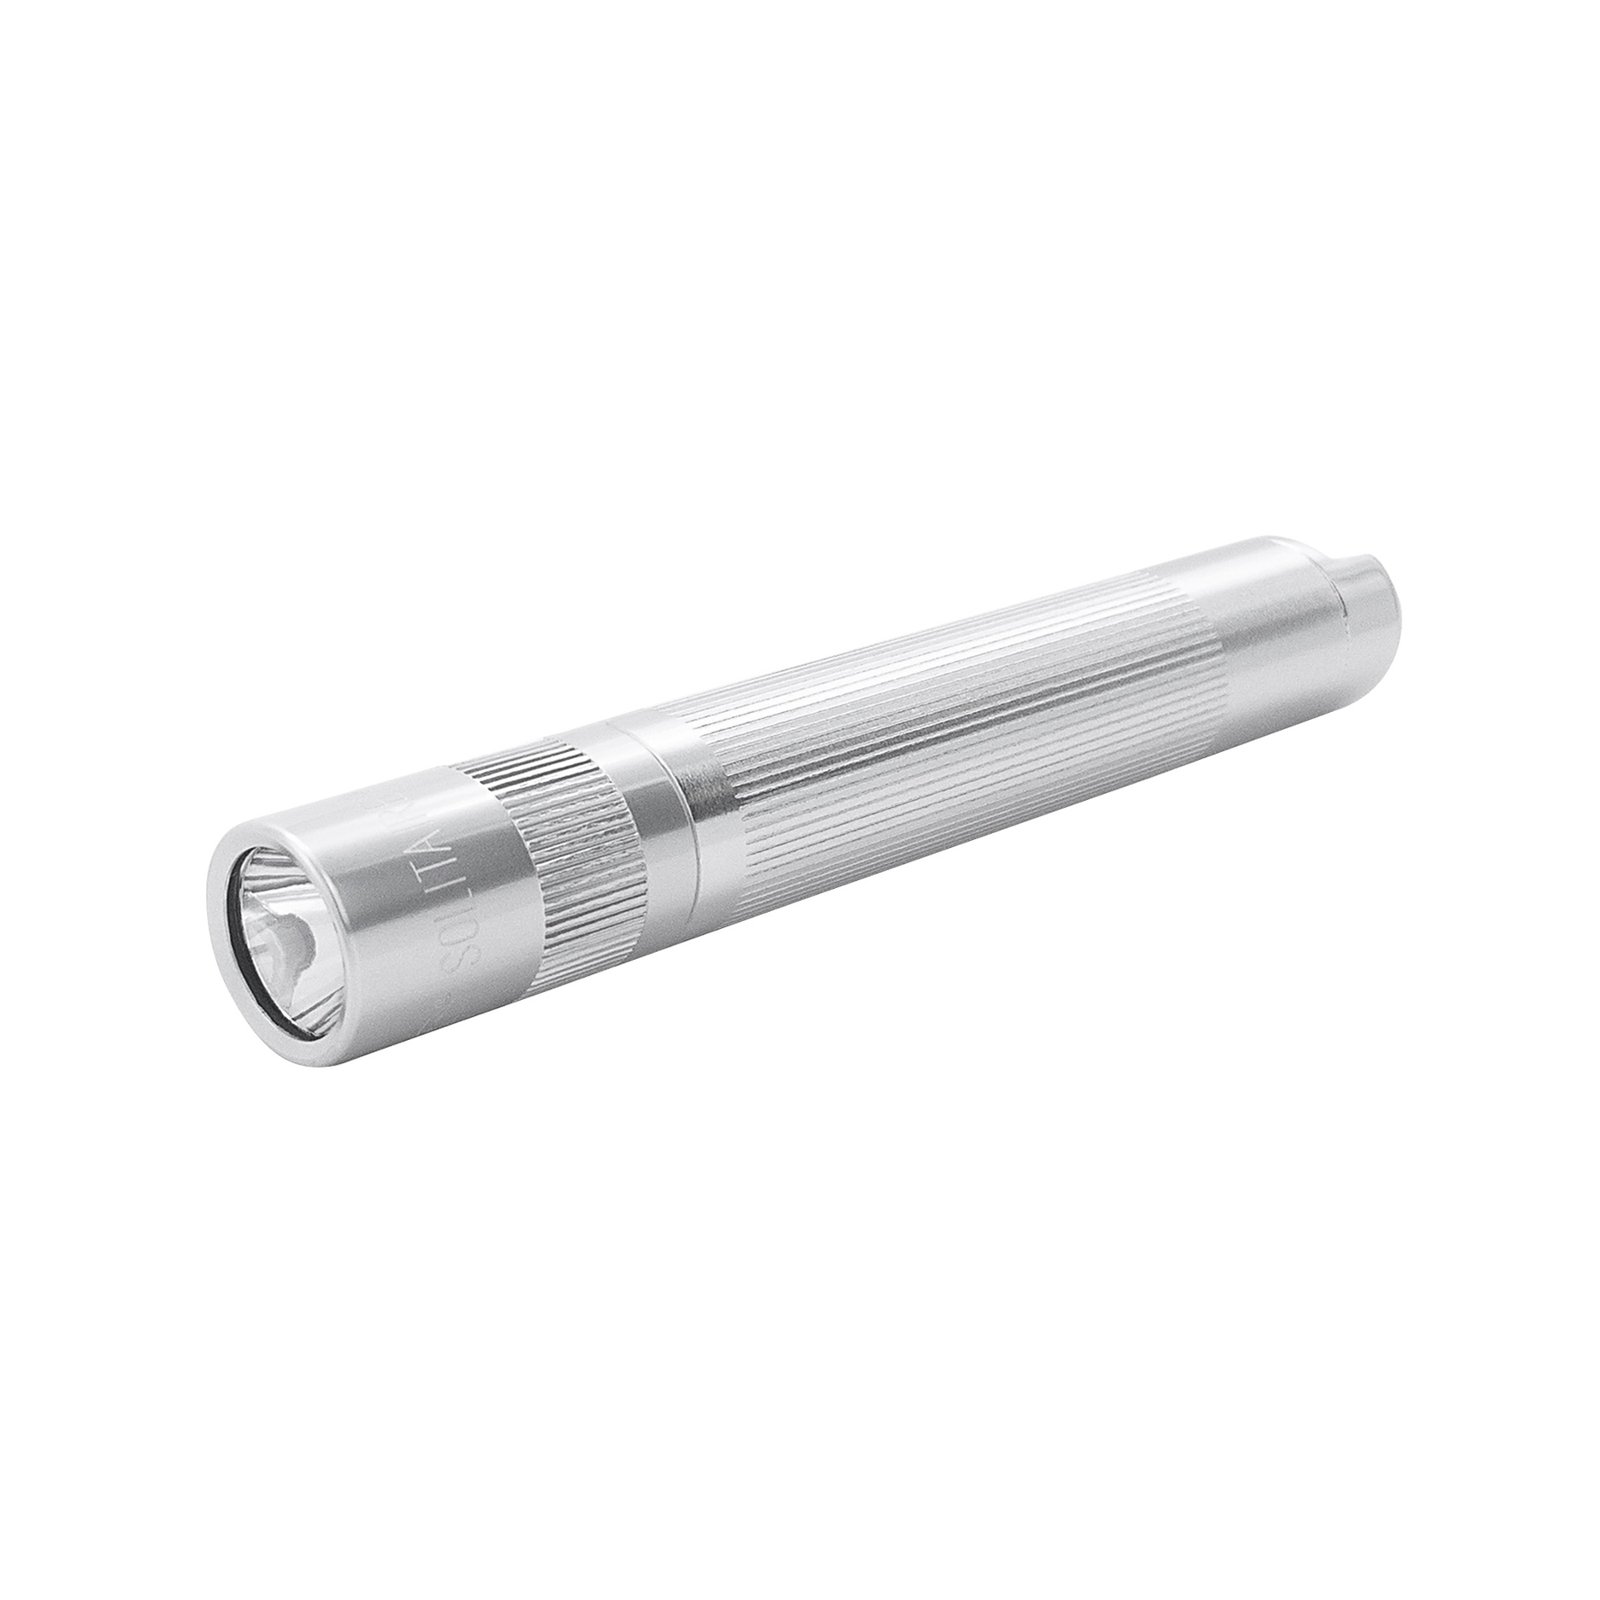 Torcia a LED Maglite Solitaire, 1 Cell AAA, Box, argento